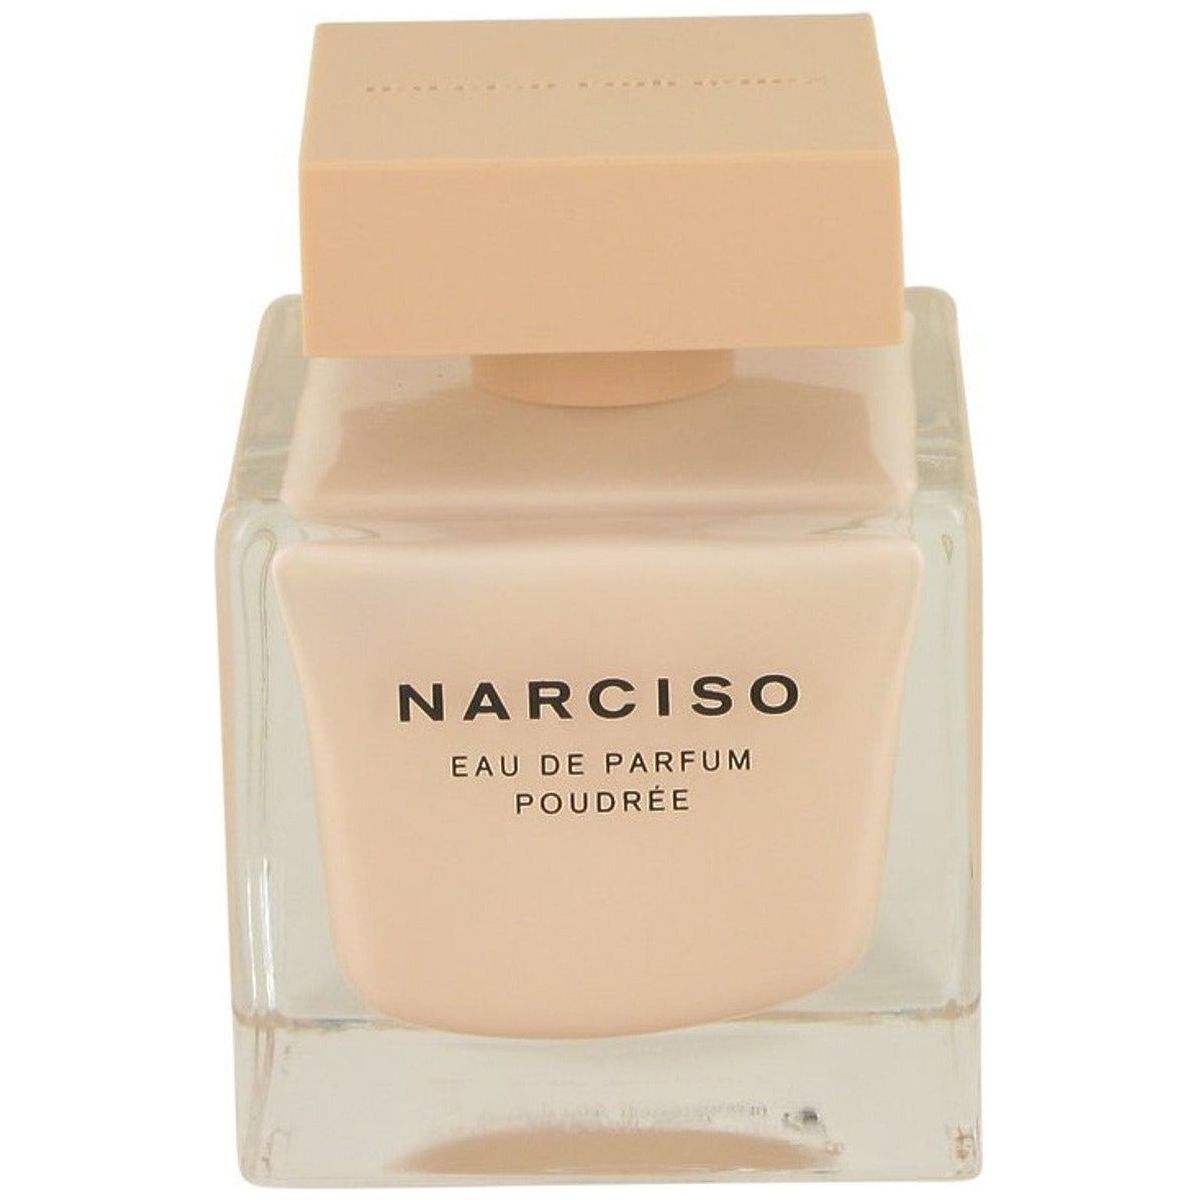 NARCISO POUDREE by Narciso Rodriguez perfume EDP 3.0 / 3 oz New Tester